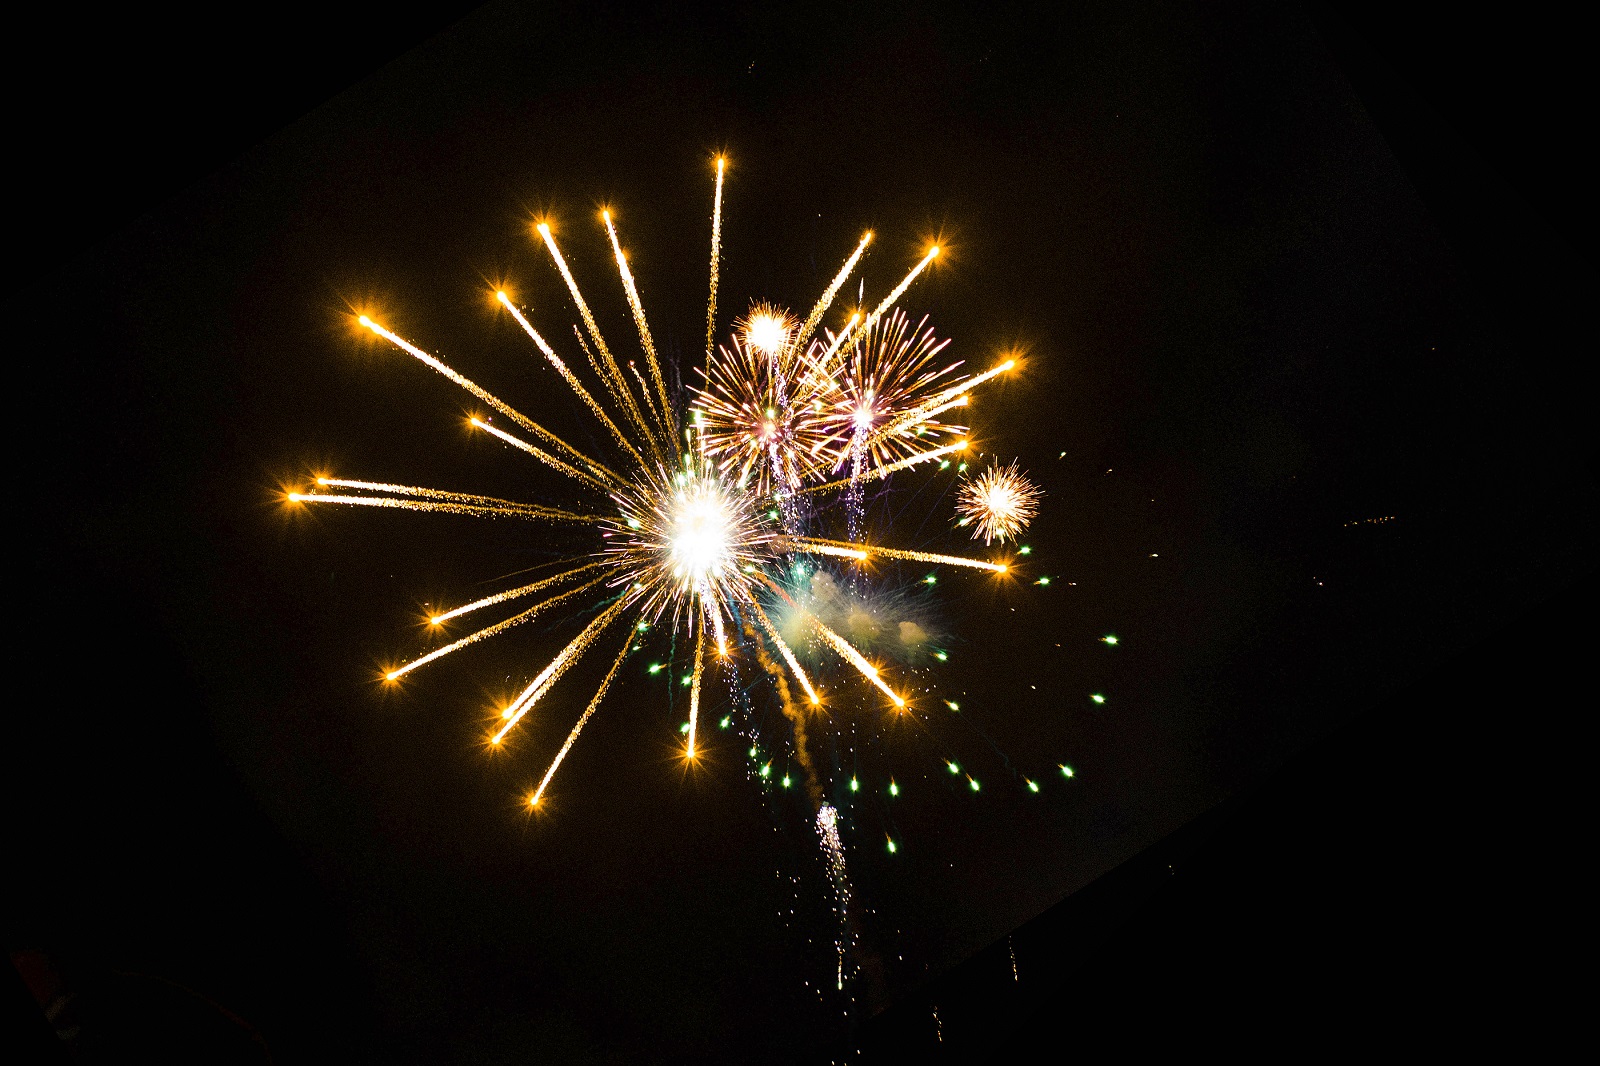 Fireworks image for July 4th 2018 for Jean-Luc Andriot blog 070218